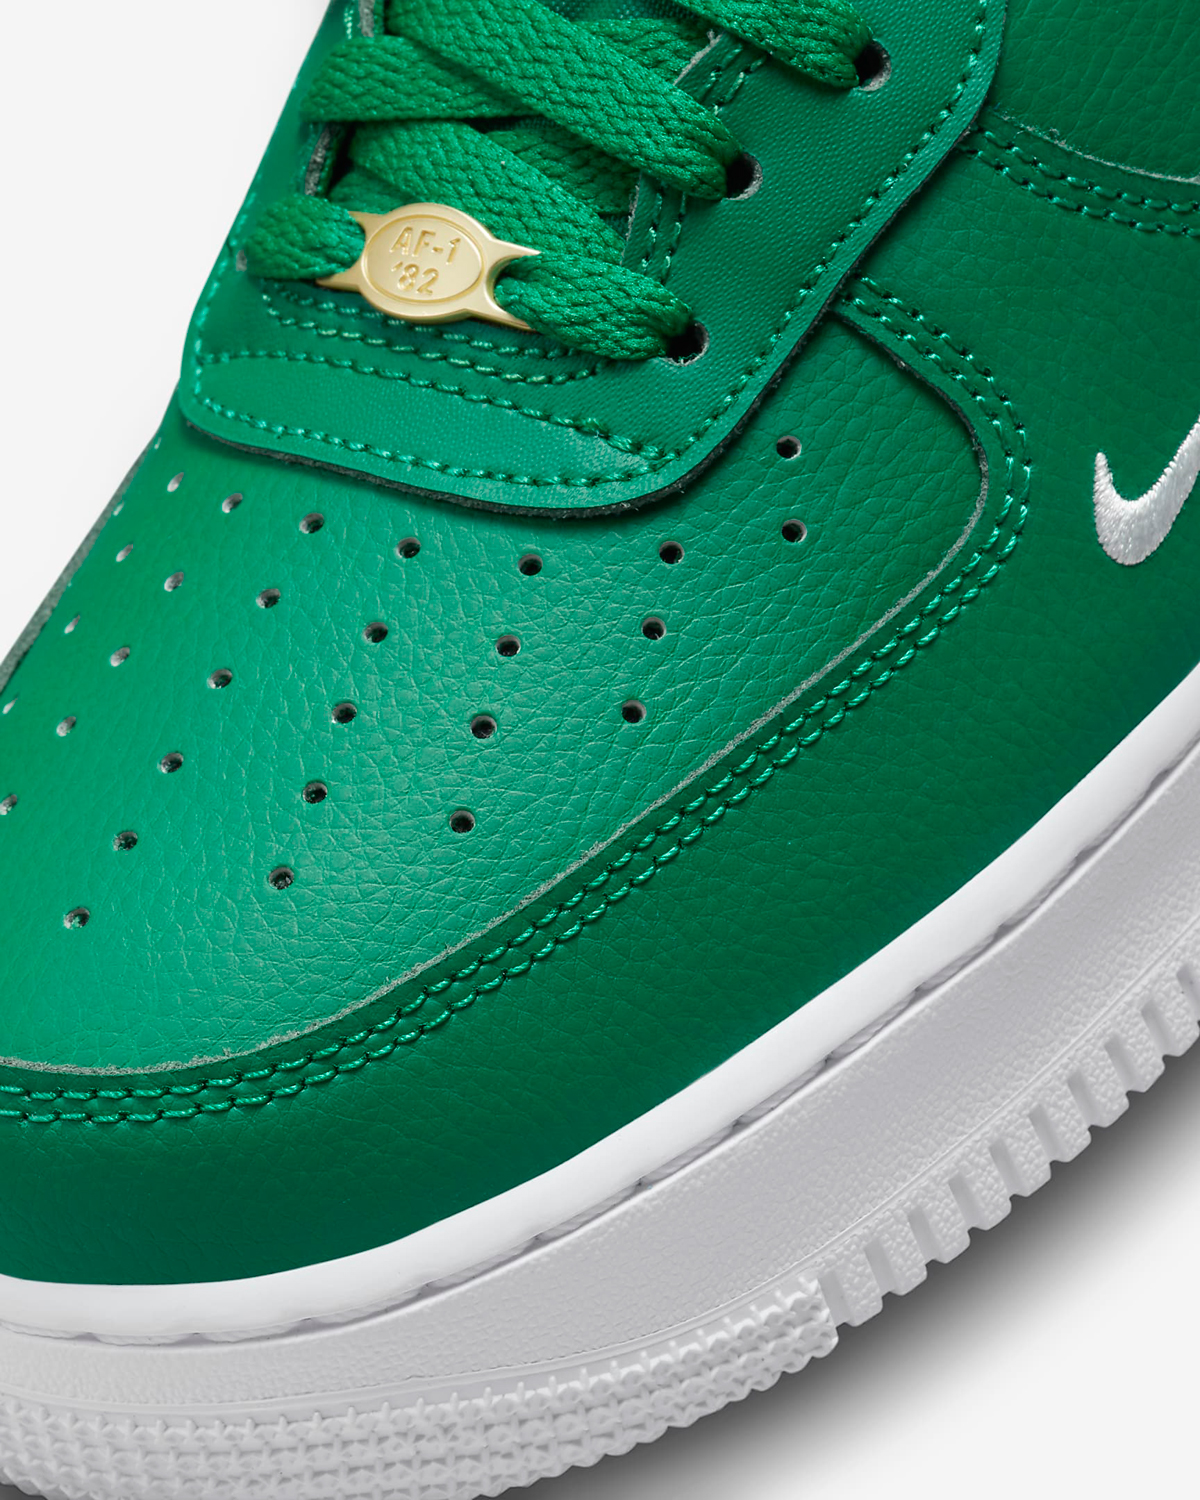 Nike-Air-Force-1-Low-40th-Anniversary-Malachite-Sail-Blue-Jay-Release-Date-7